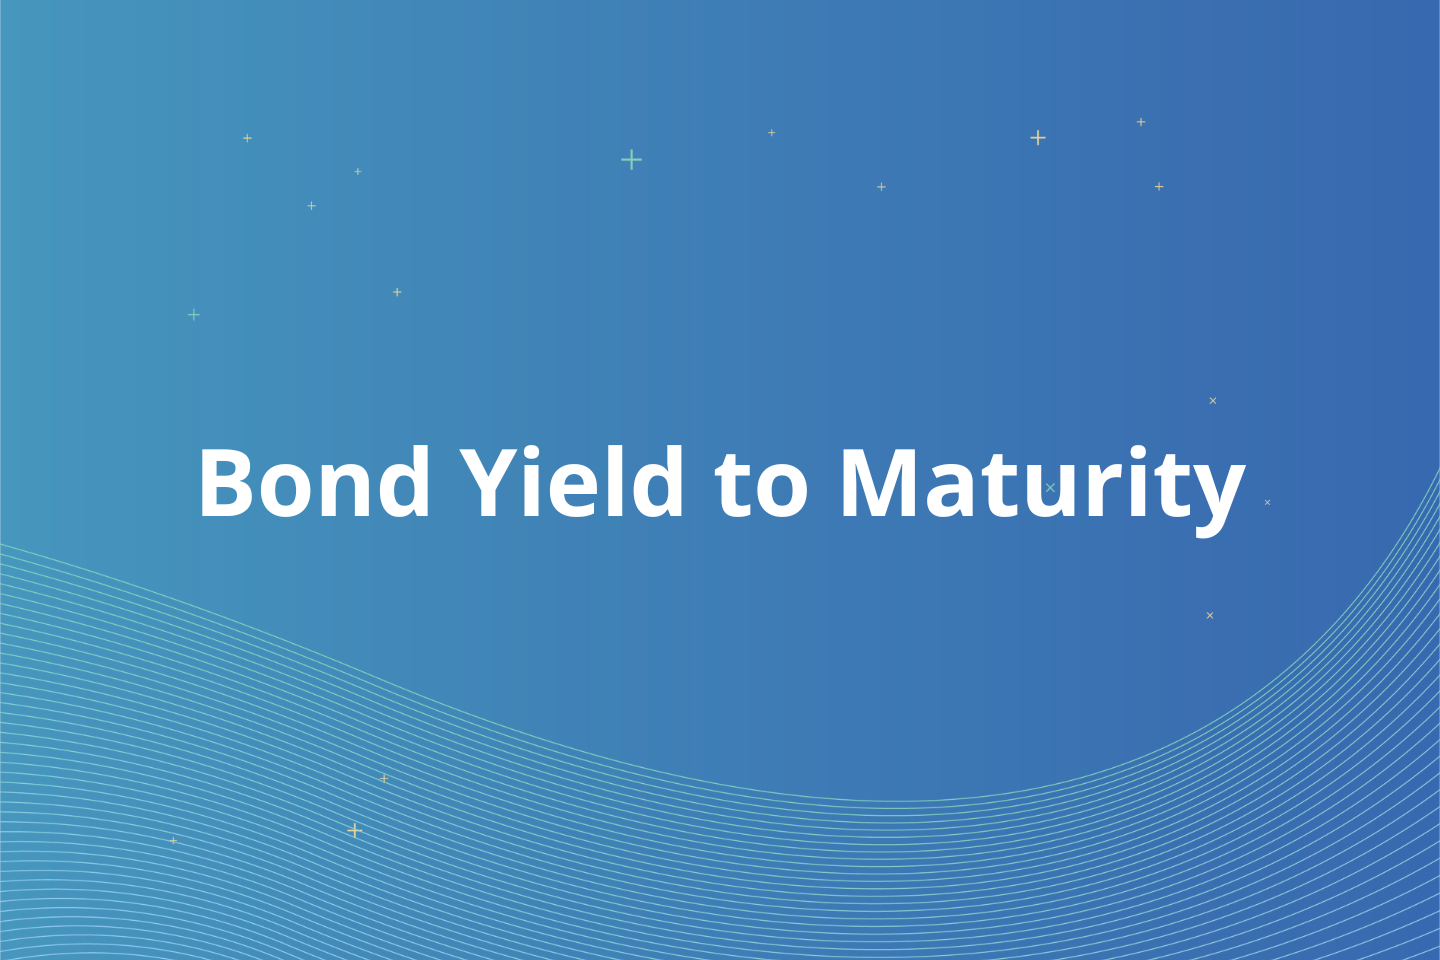 What Is a Bond Yield to Maturity?